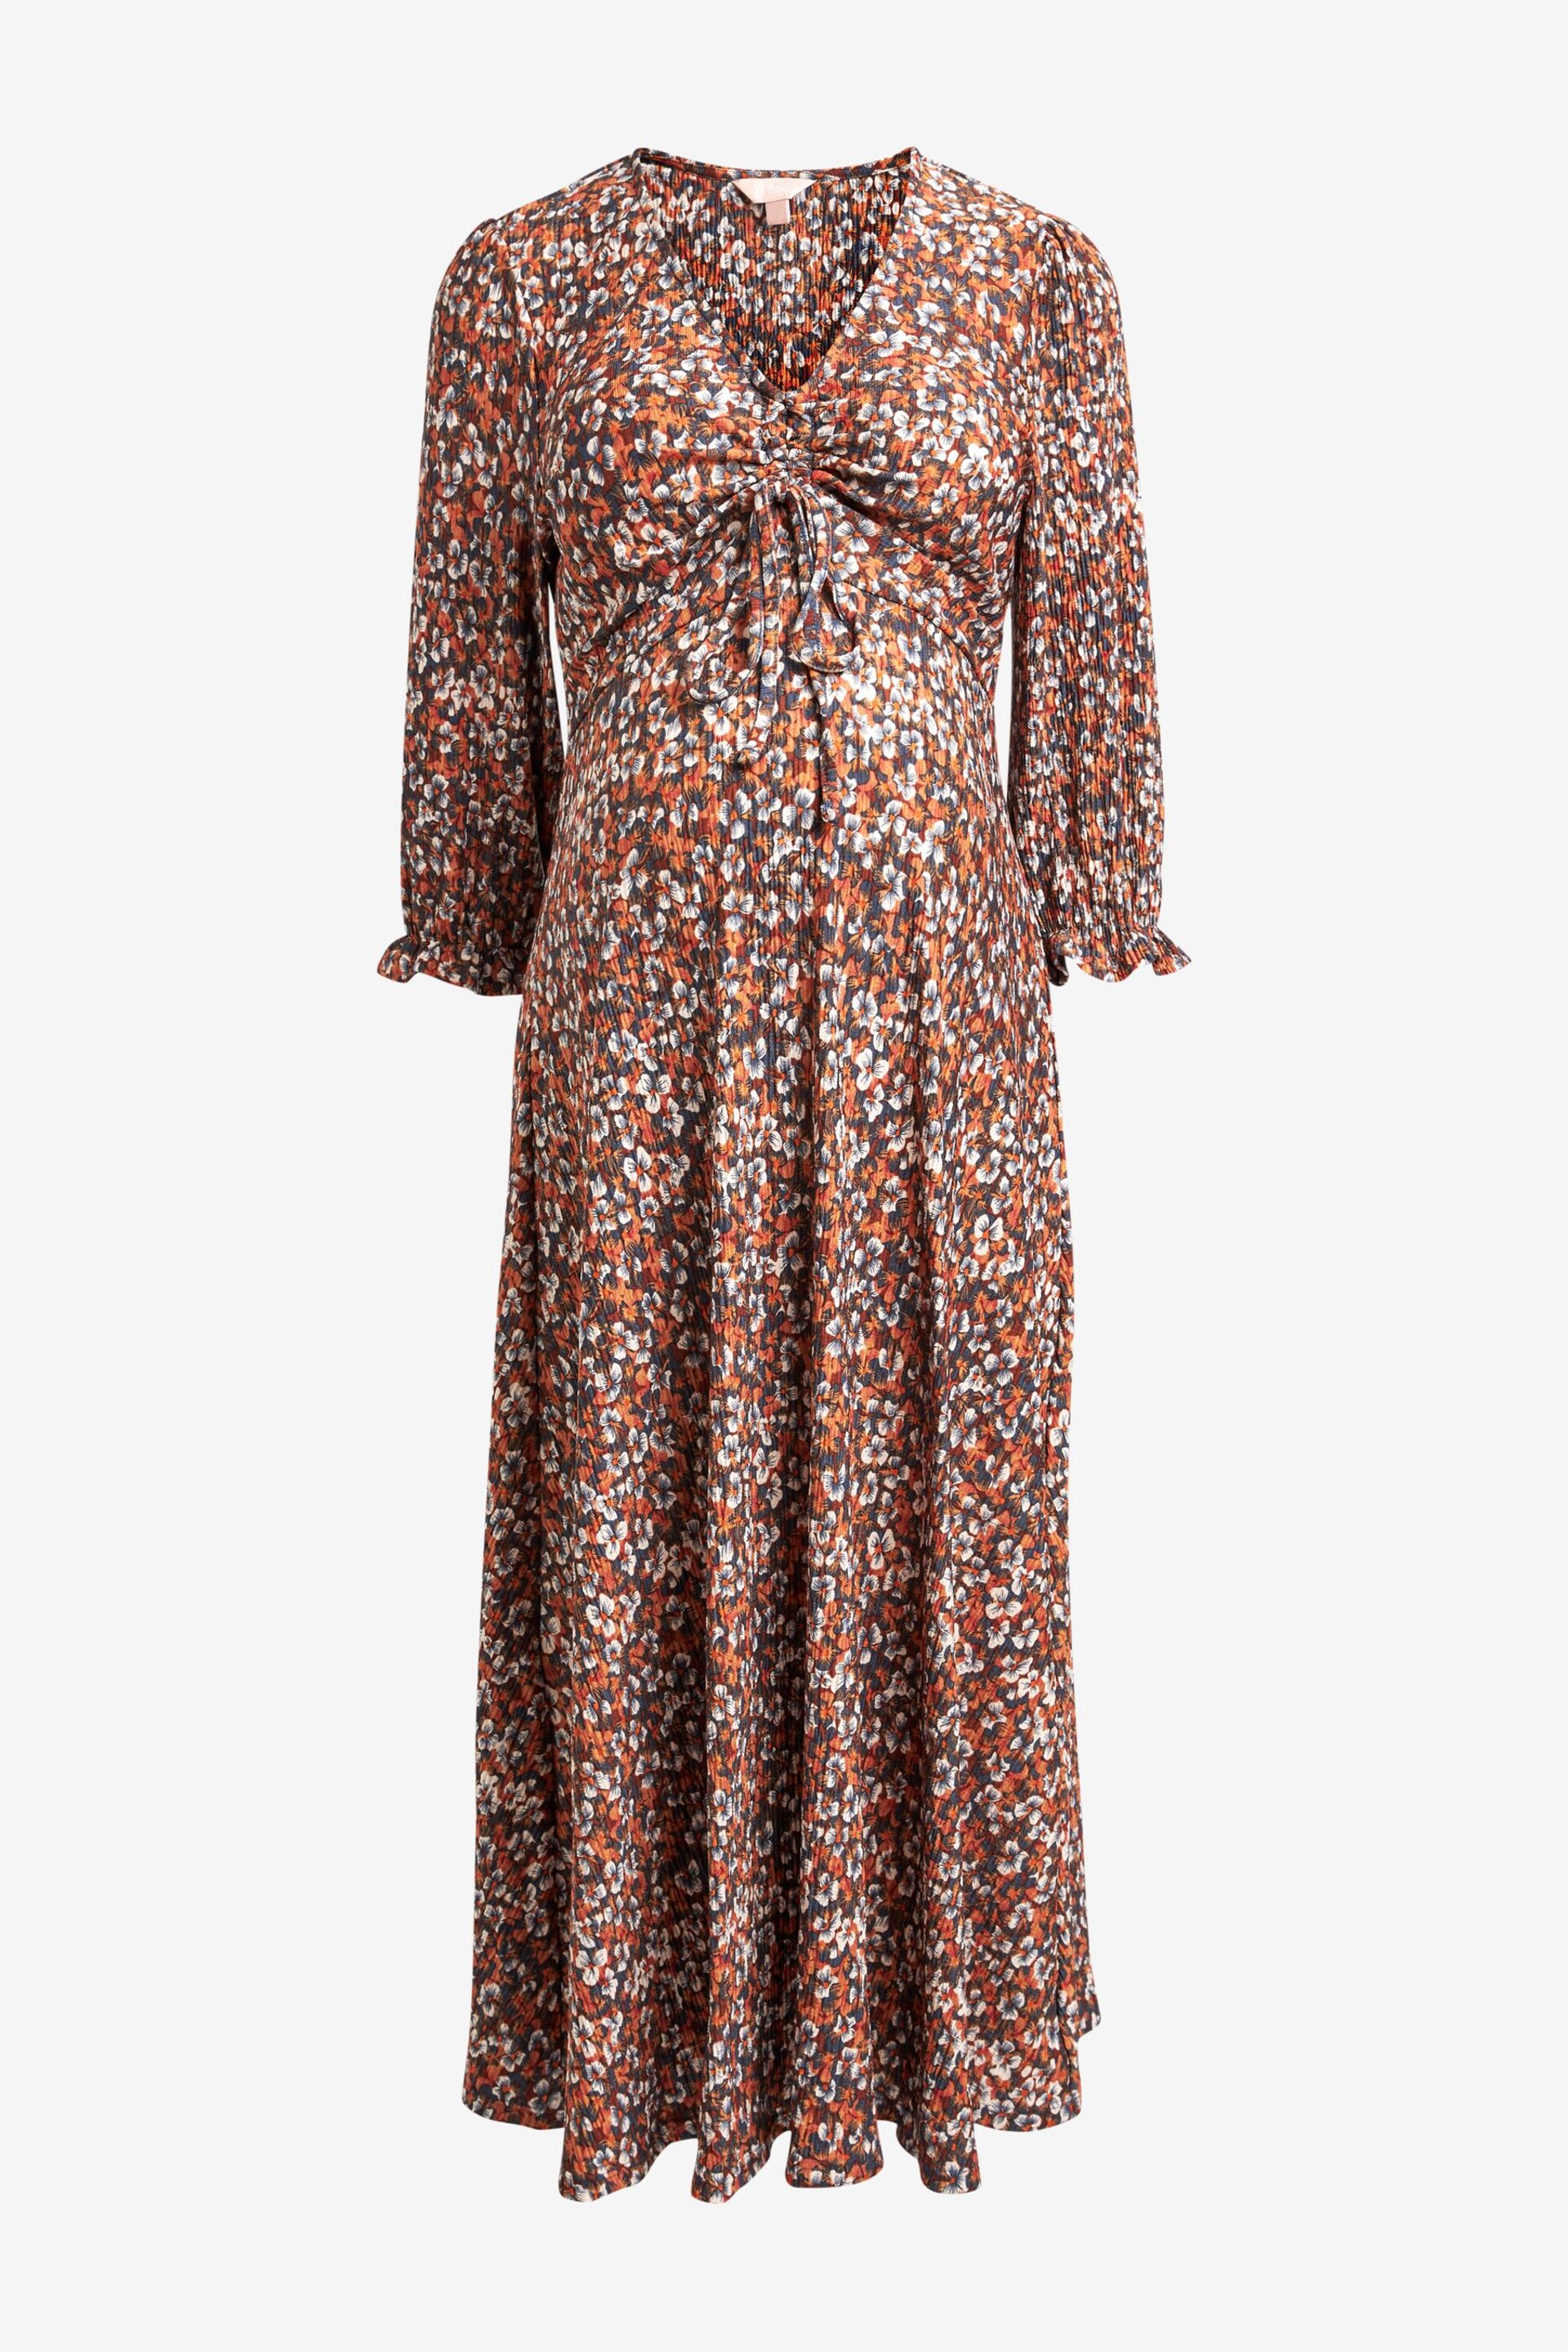 Floral Maternity Ruched Front Print Dress - Image 5 of 7